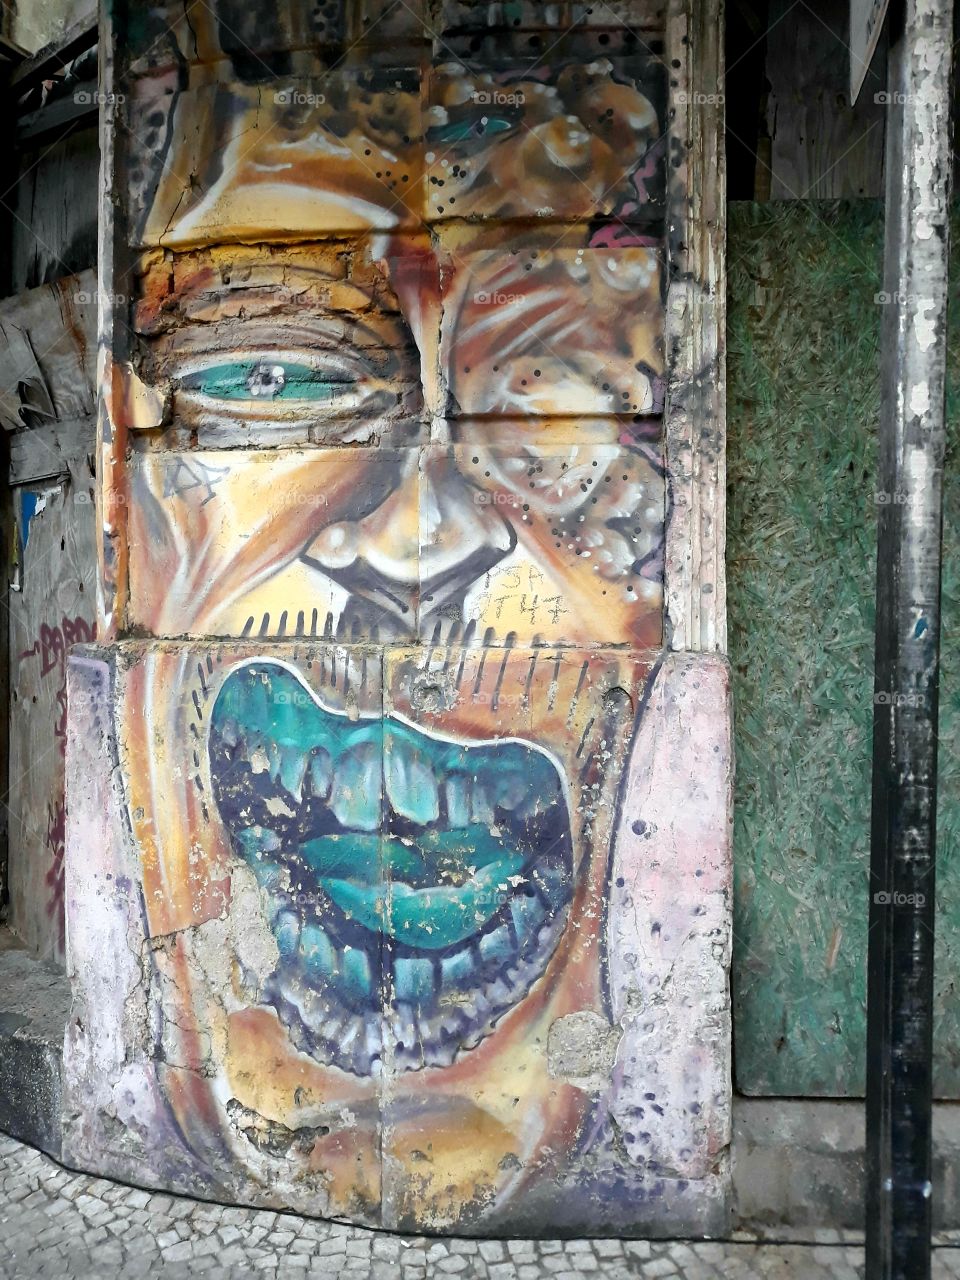 Graffiti made on the wall of an abandoned building in Recife.